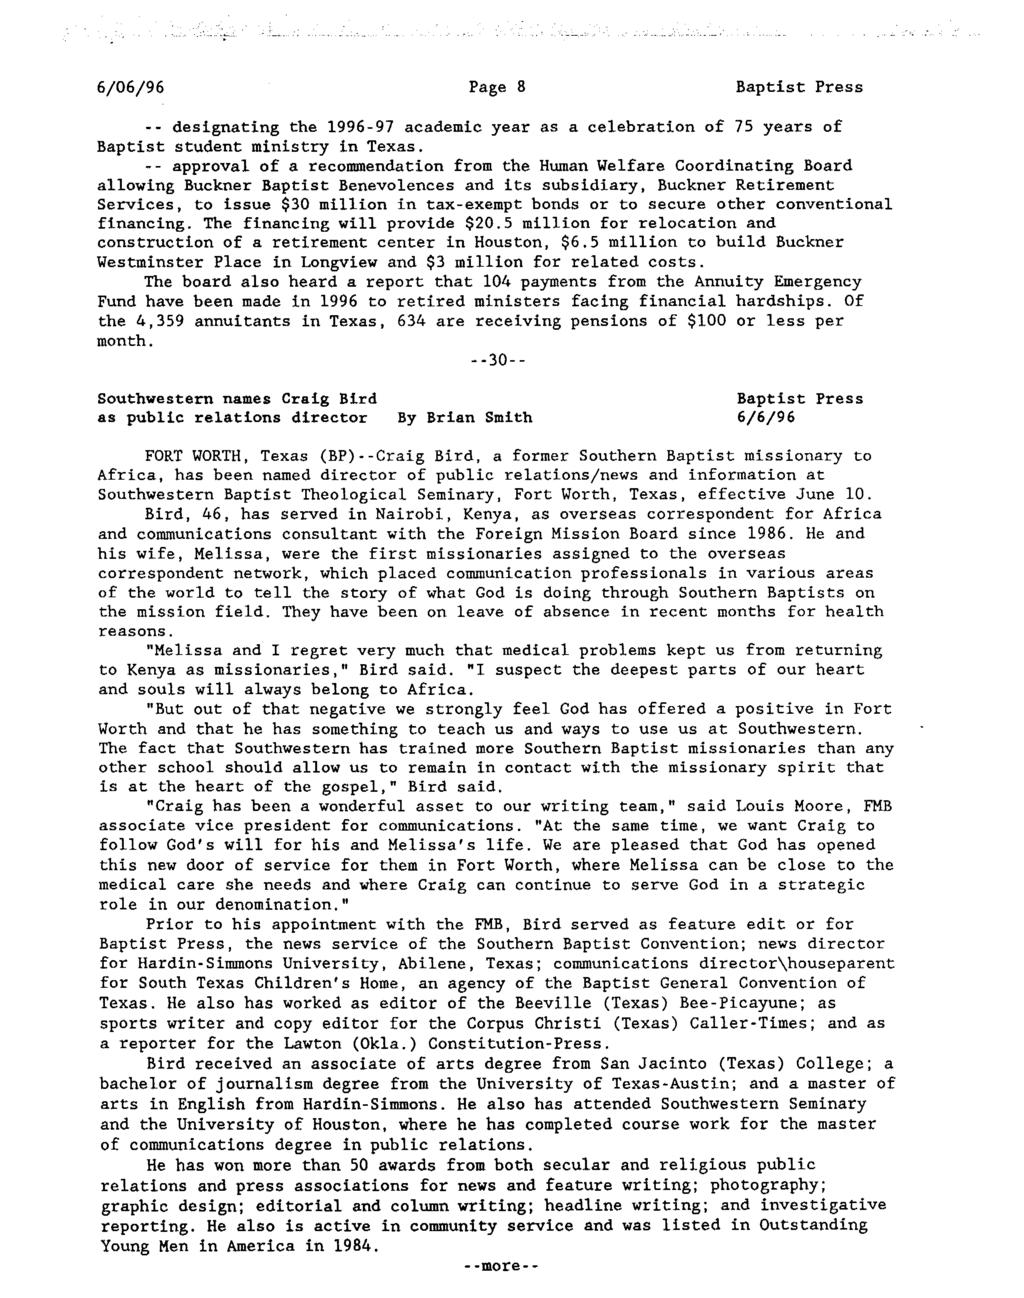 6/06/96 Page 8 designating the 1996-97 academic year as a celebration of 75 years of Baptist student ministry in Texas.